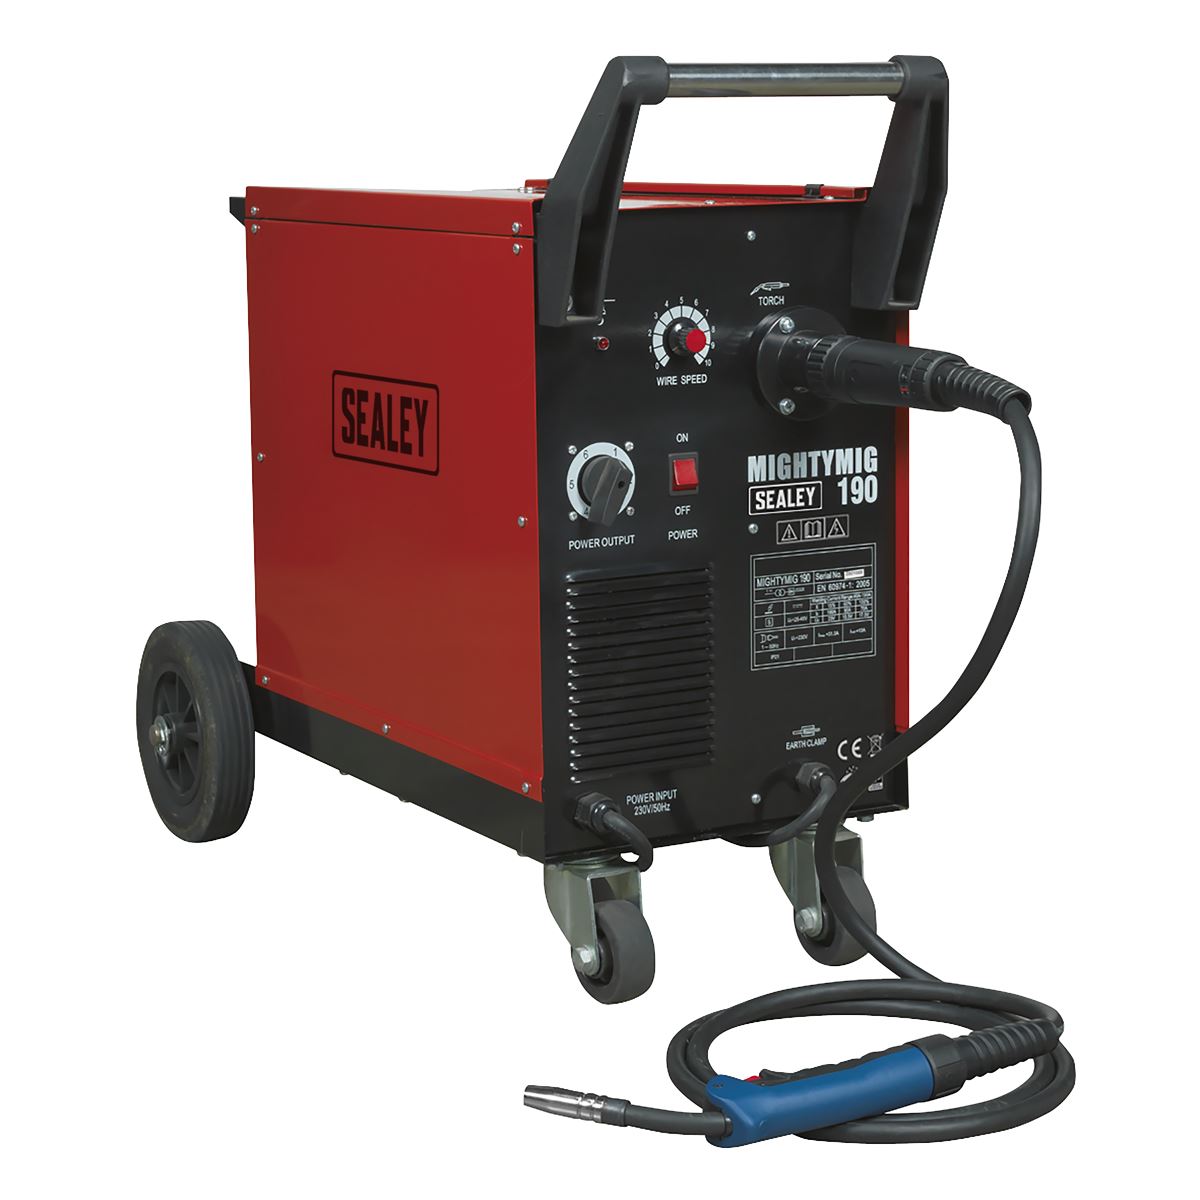 Sealey Professional Gas/No-Gas MIG Welder 190A with Euro Torch